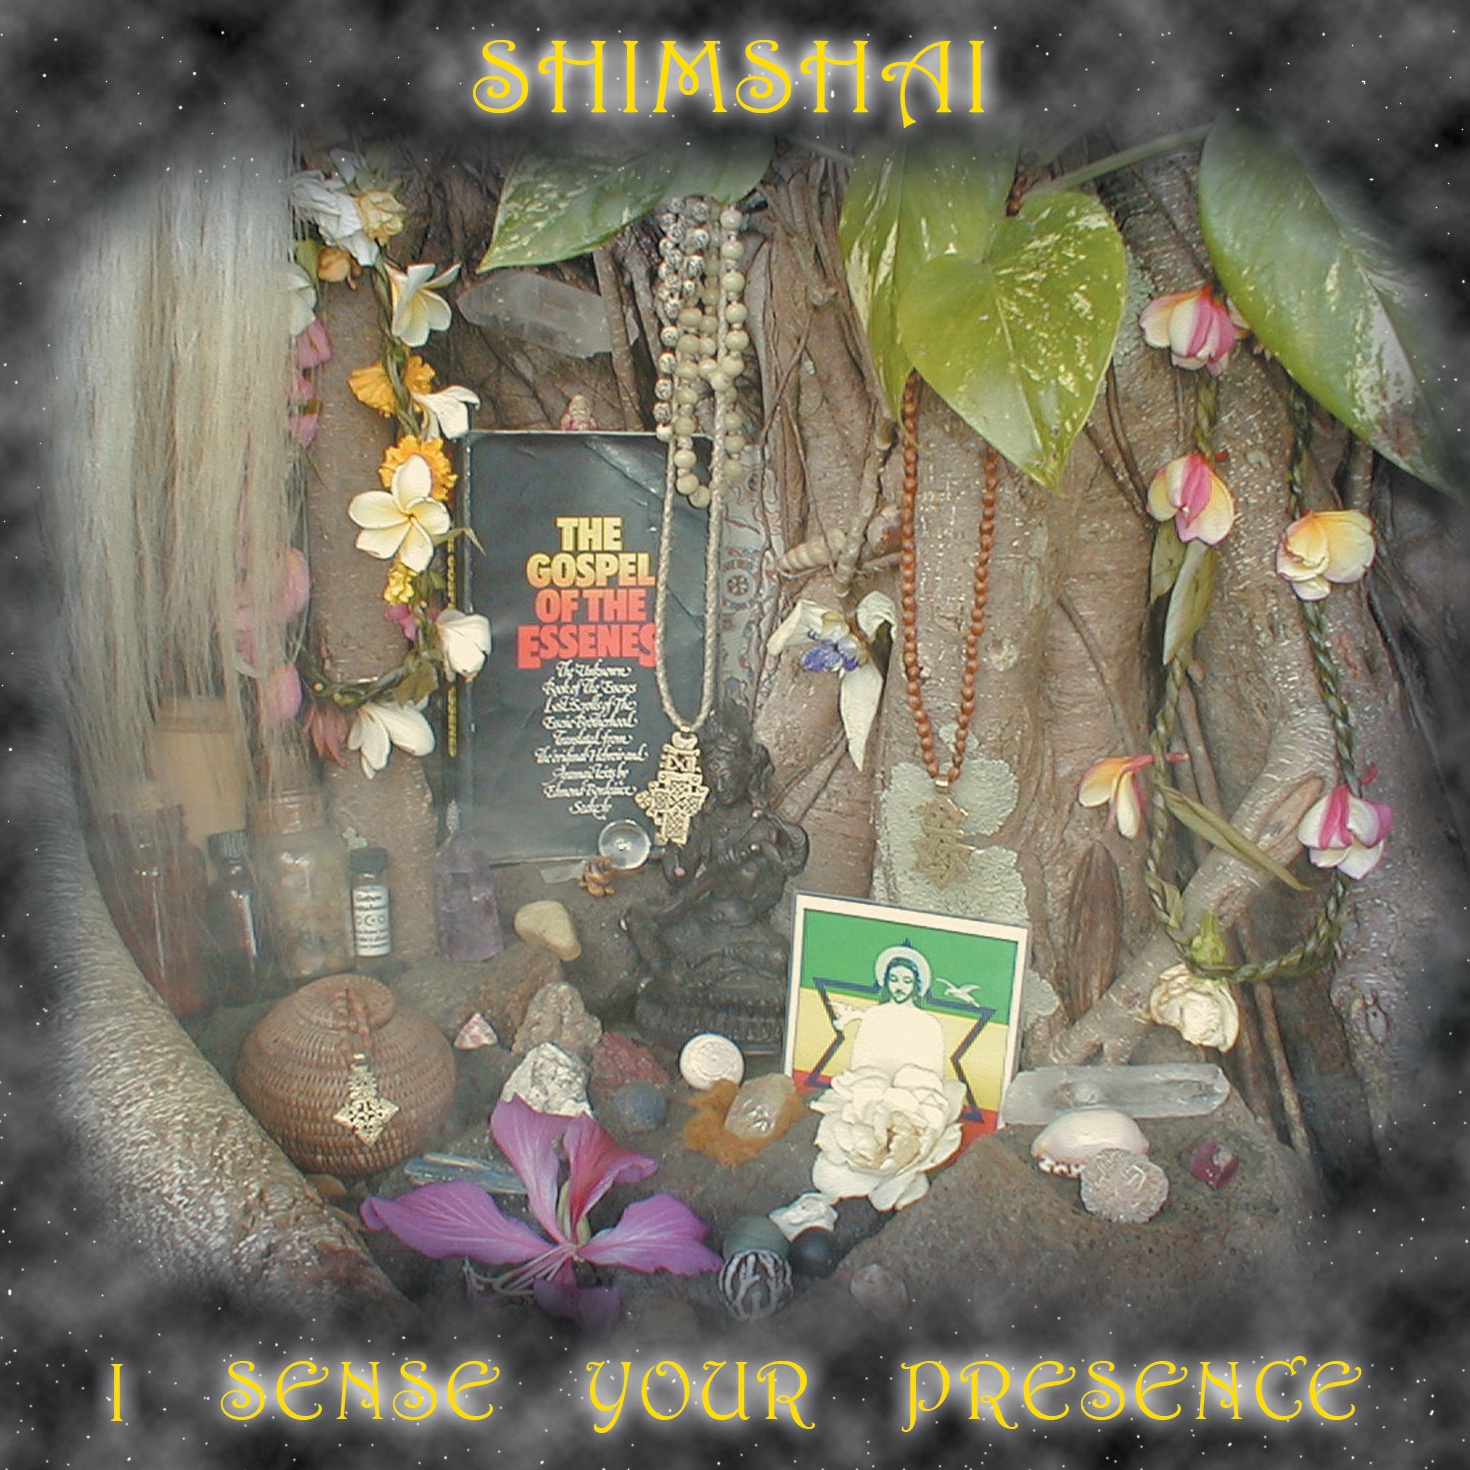 Yeshu-Maria by Shimshai from the album I Sense Your Presence, original music with prayers of the Ancient Essenes